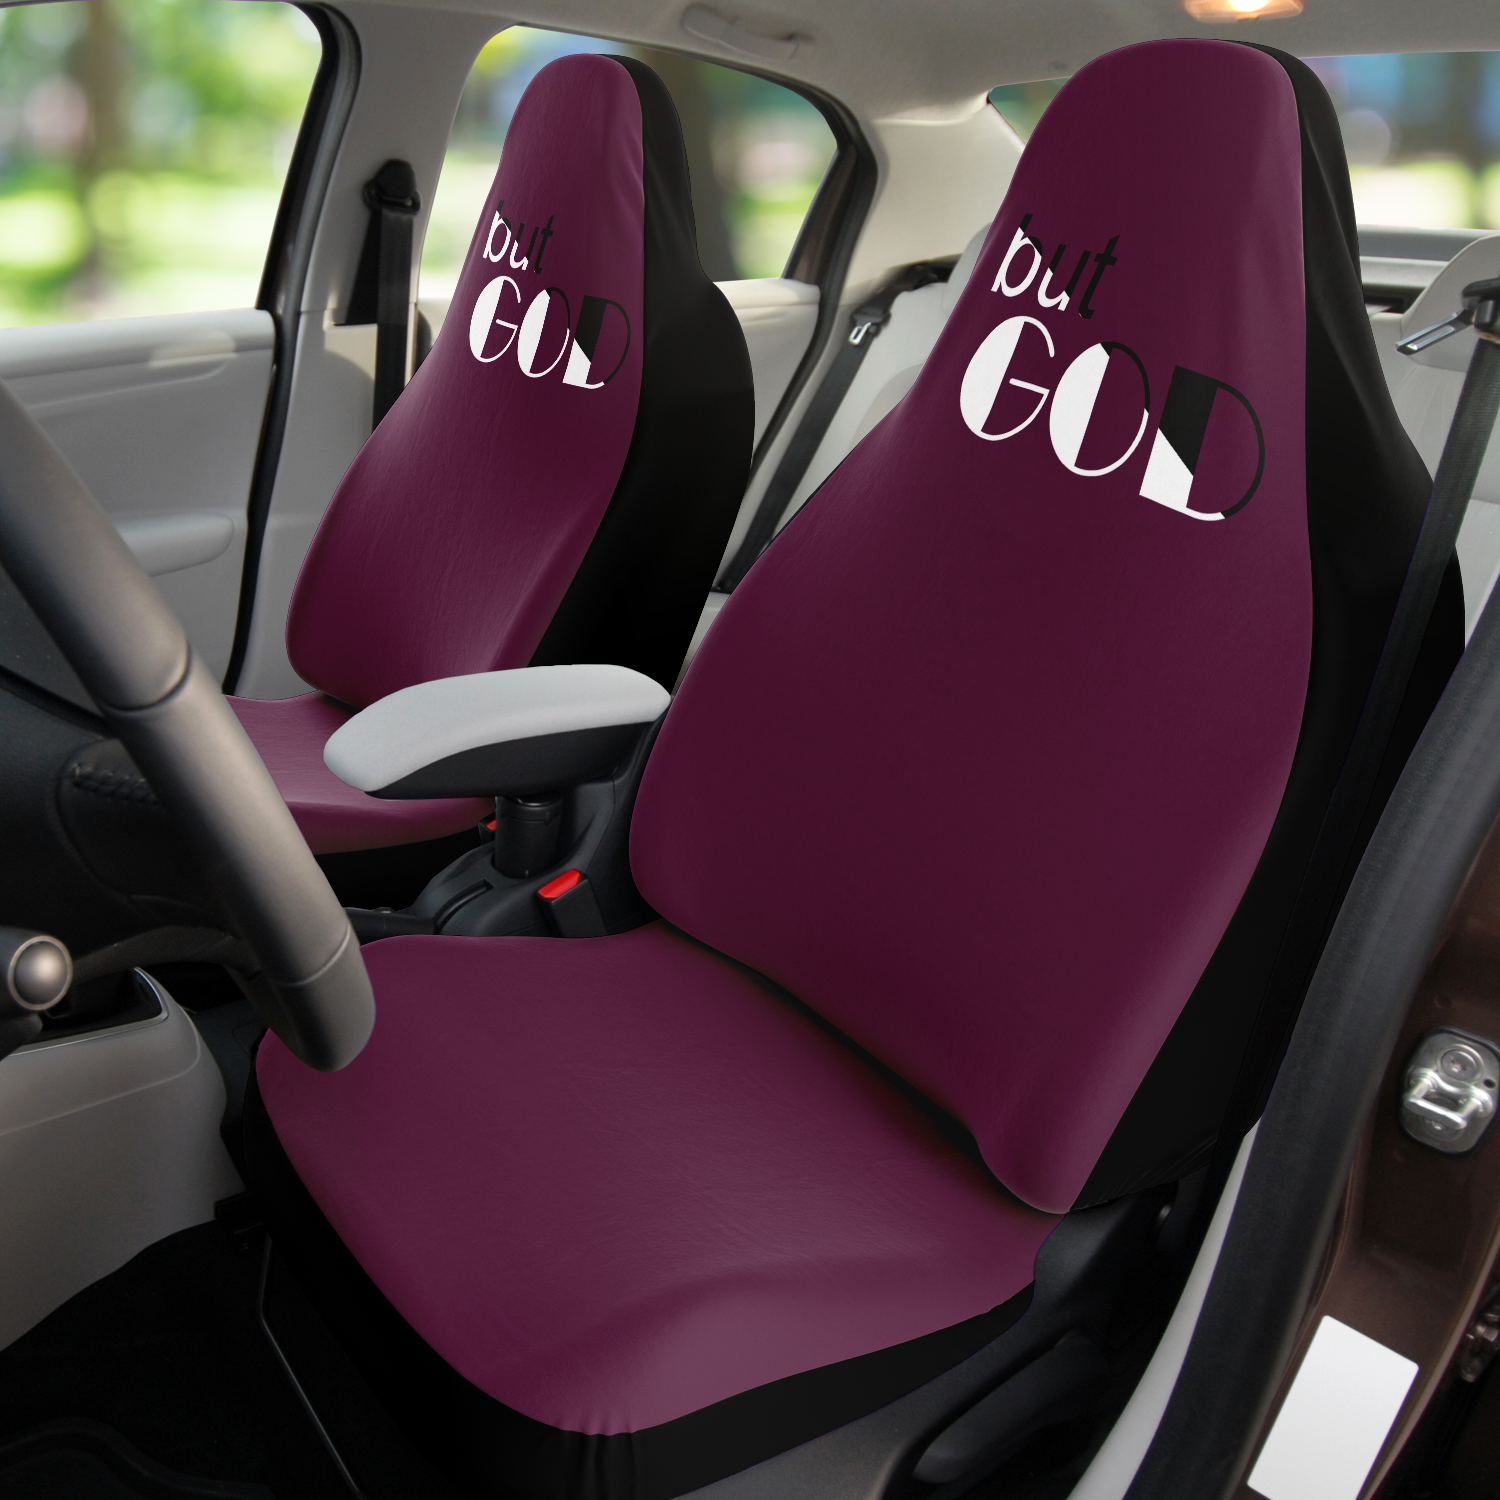 BUT GOD - Seat Covers